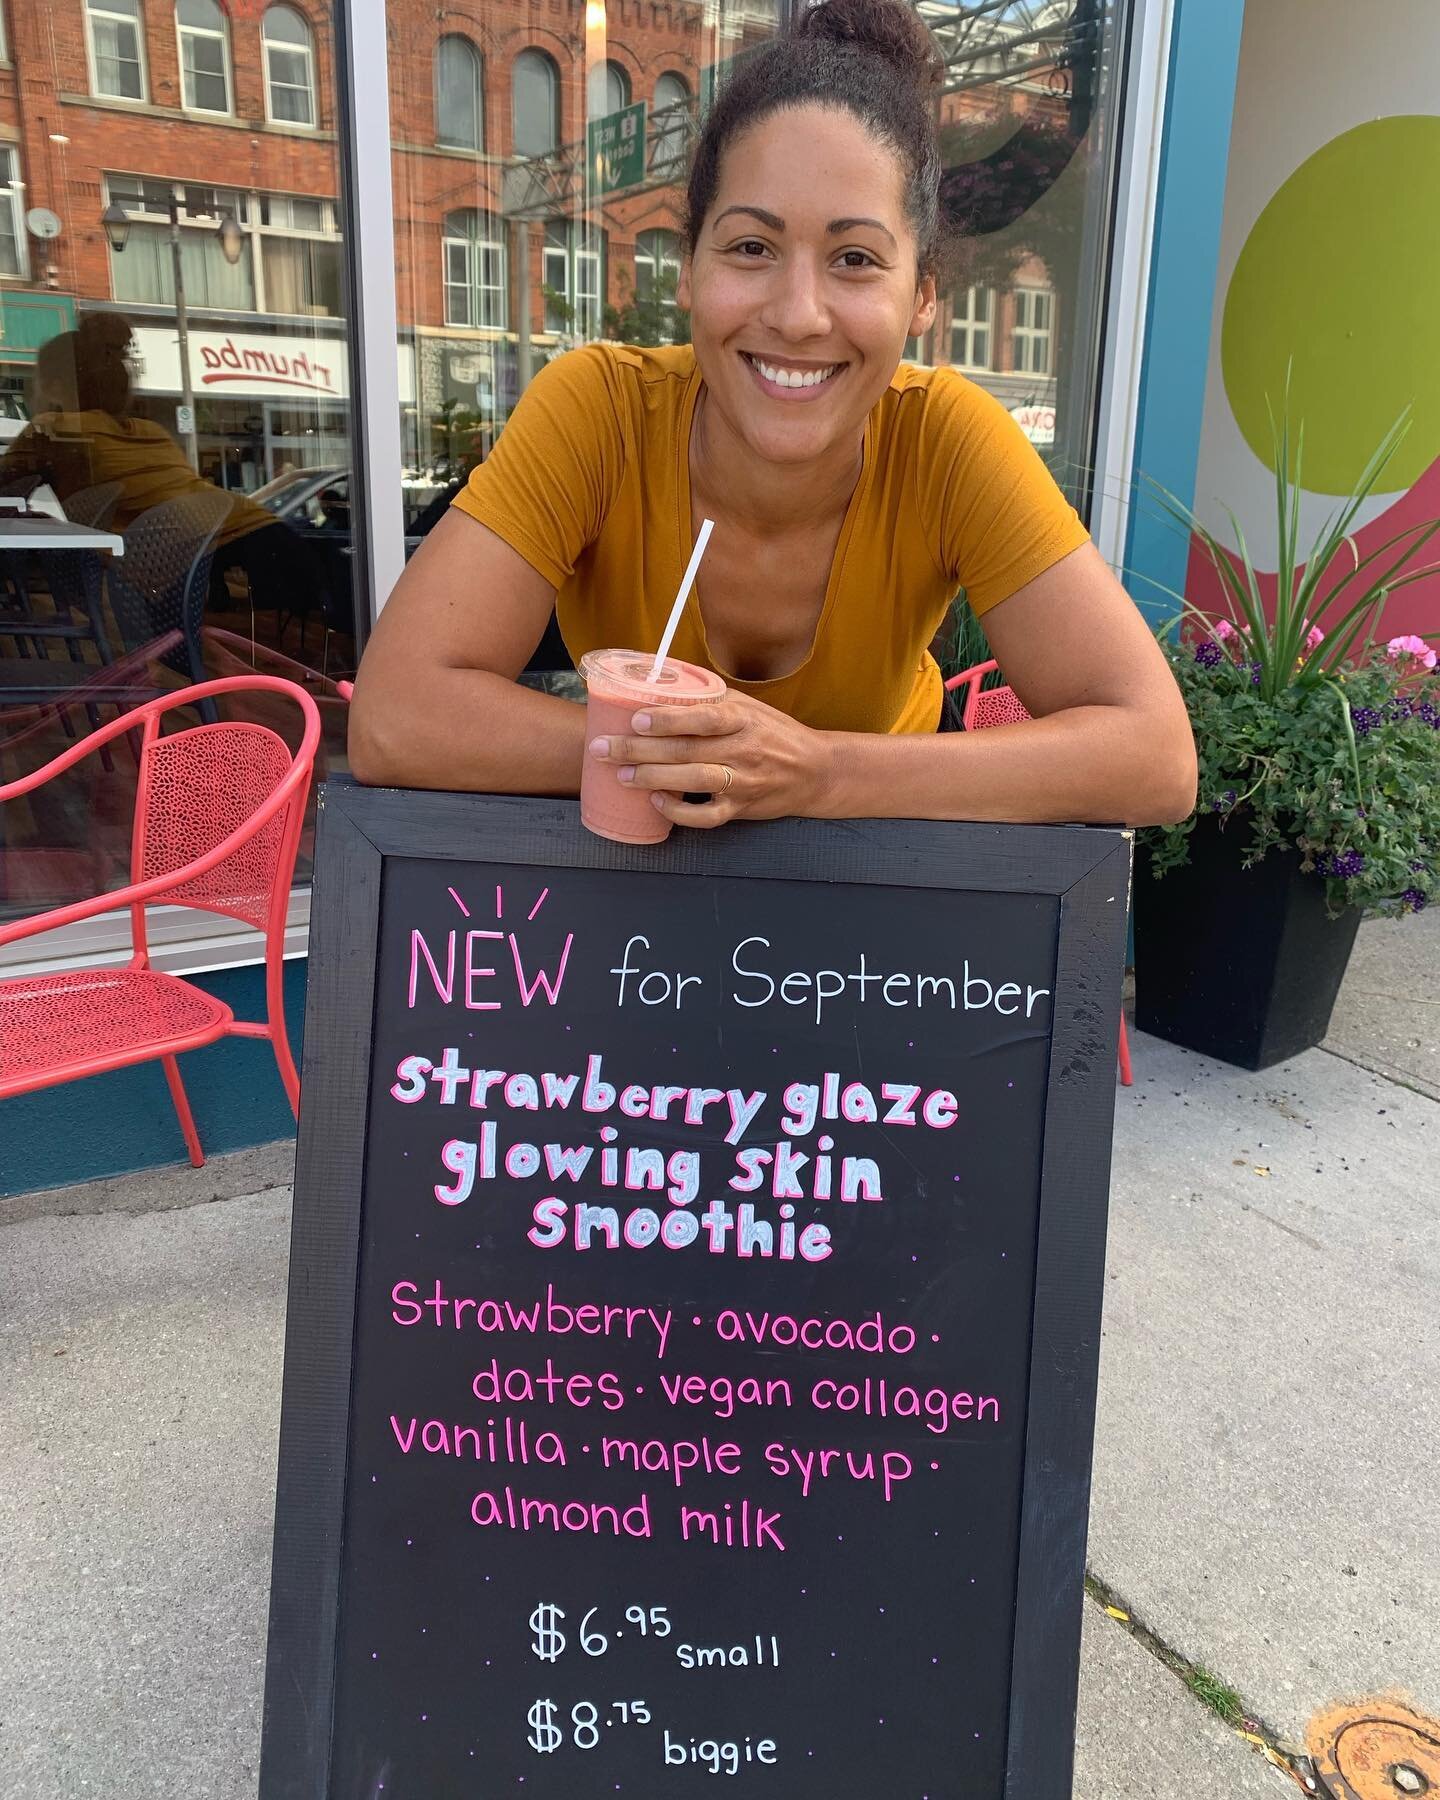 Check out this month&rsquo;s smoothie. It will not only keep you going but GLOWING at the same time! 😊 #nofilter @visitstratfordon @stratfordccbia #vegansmoothies #vegancollagen #glowingsmoothie